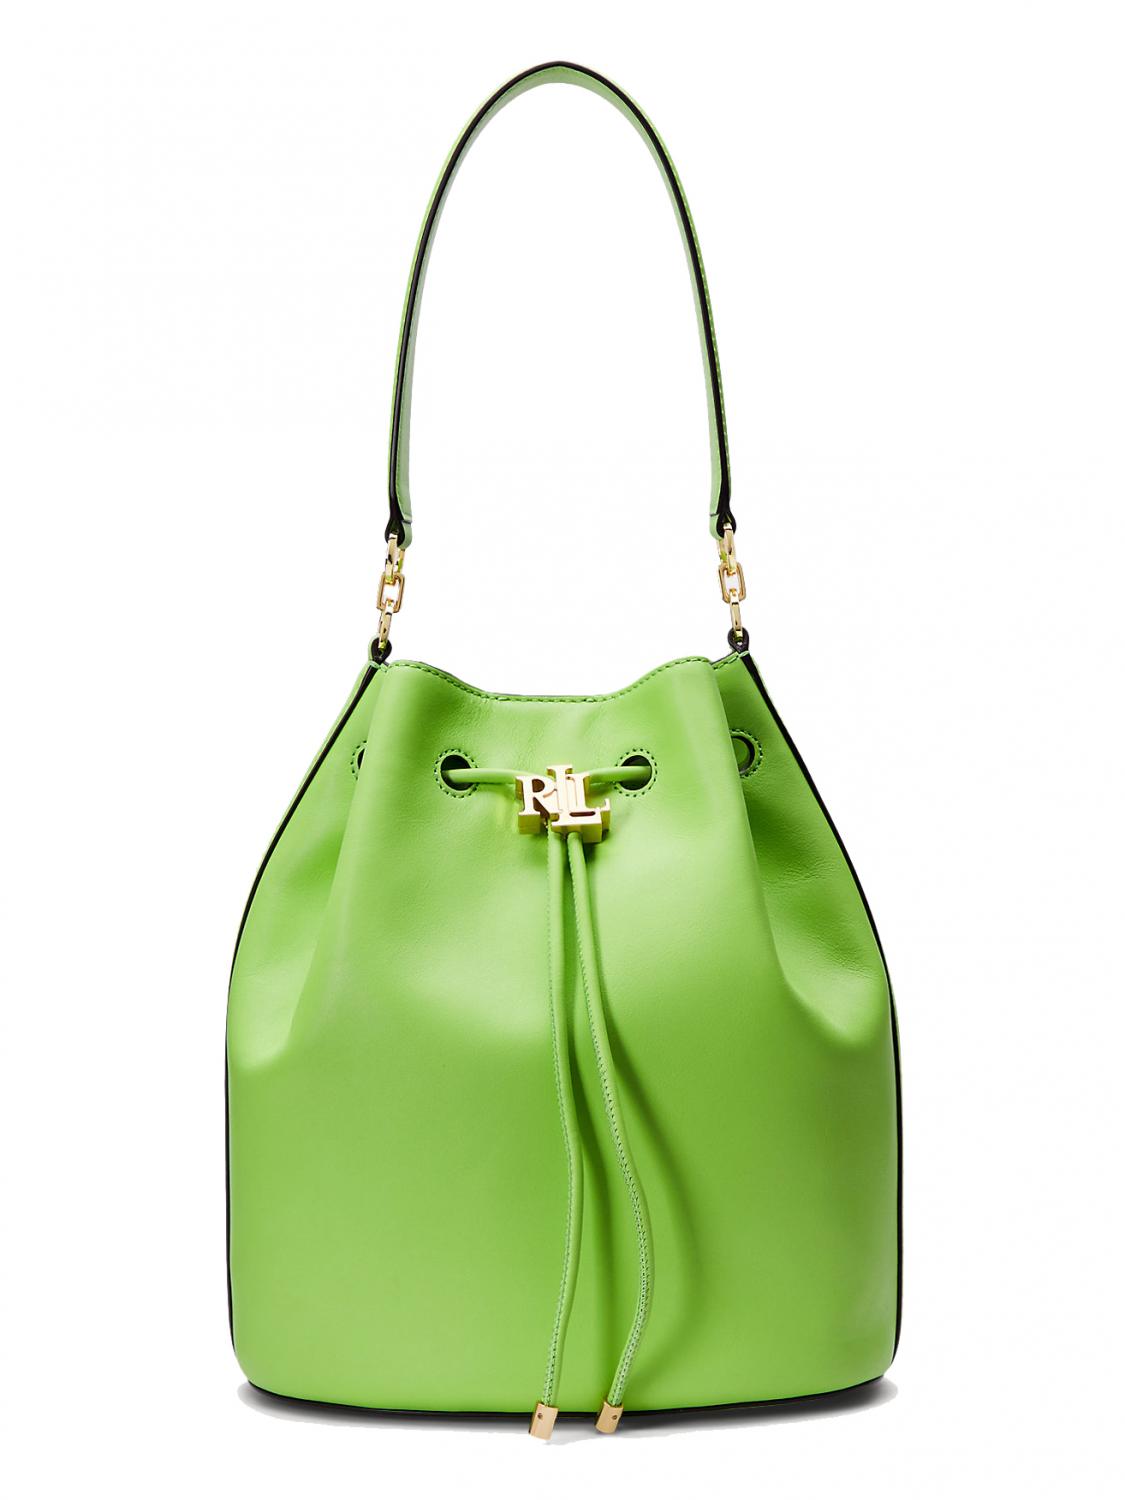 Ralph Lauren Andie Large Leather Bucket Bag Green Riviera - Buy At Outlet  Prices!